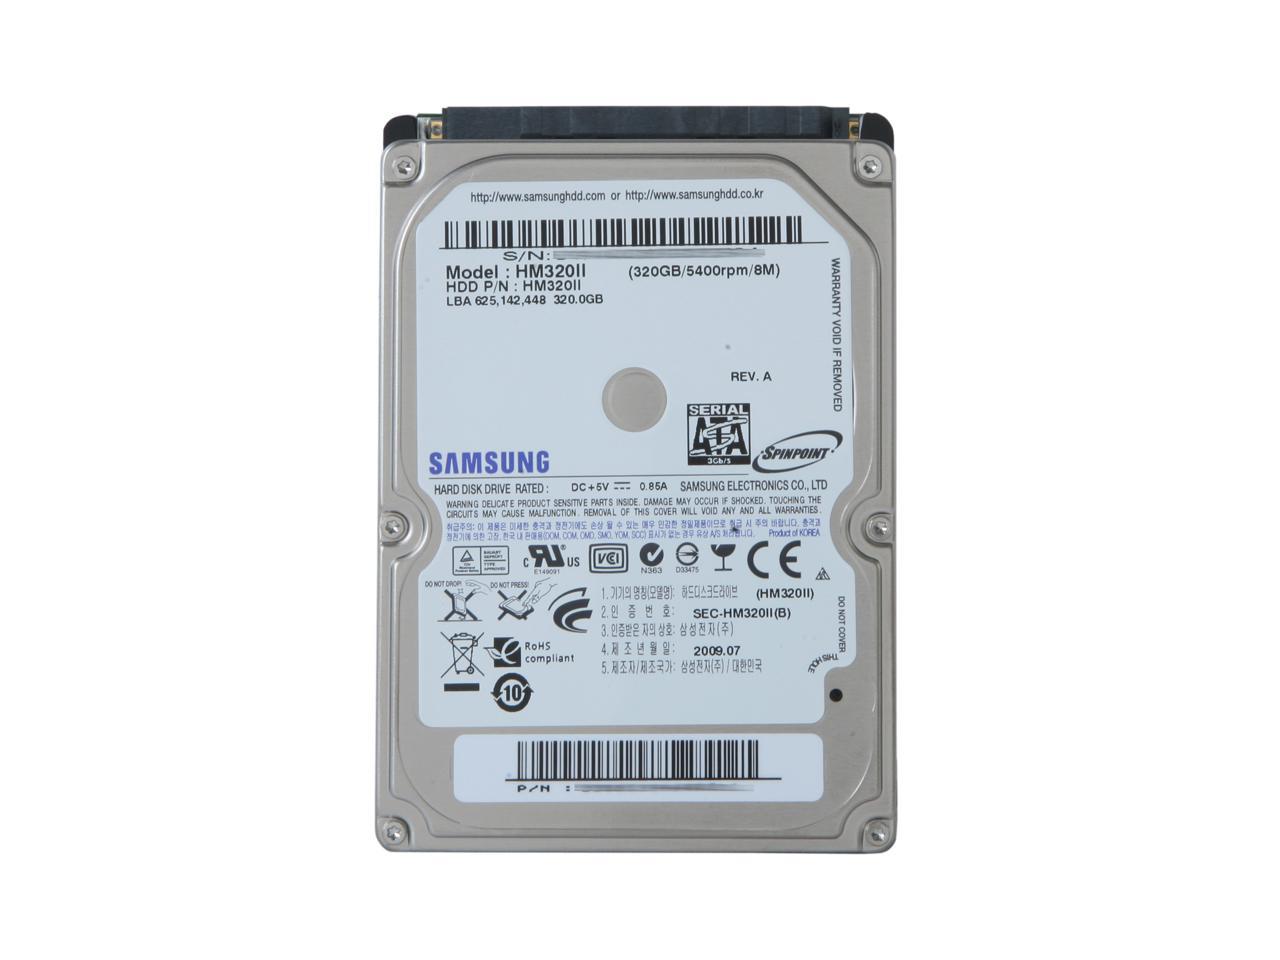 Samsung Spinpoint M7 Hm320Ii 320Gb 5400 Rpm 8Mb Cache Sata 3.0Gb/S 2.5" Internal Notebook Hard Drive Bare Drive